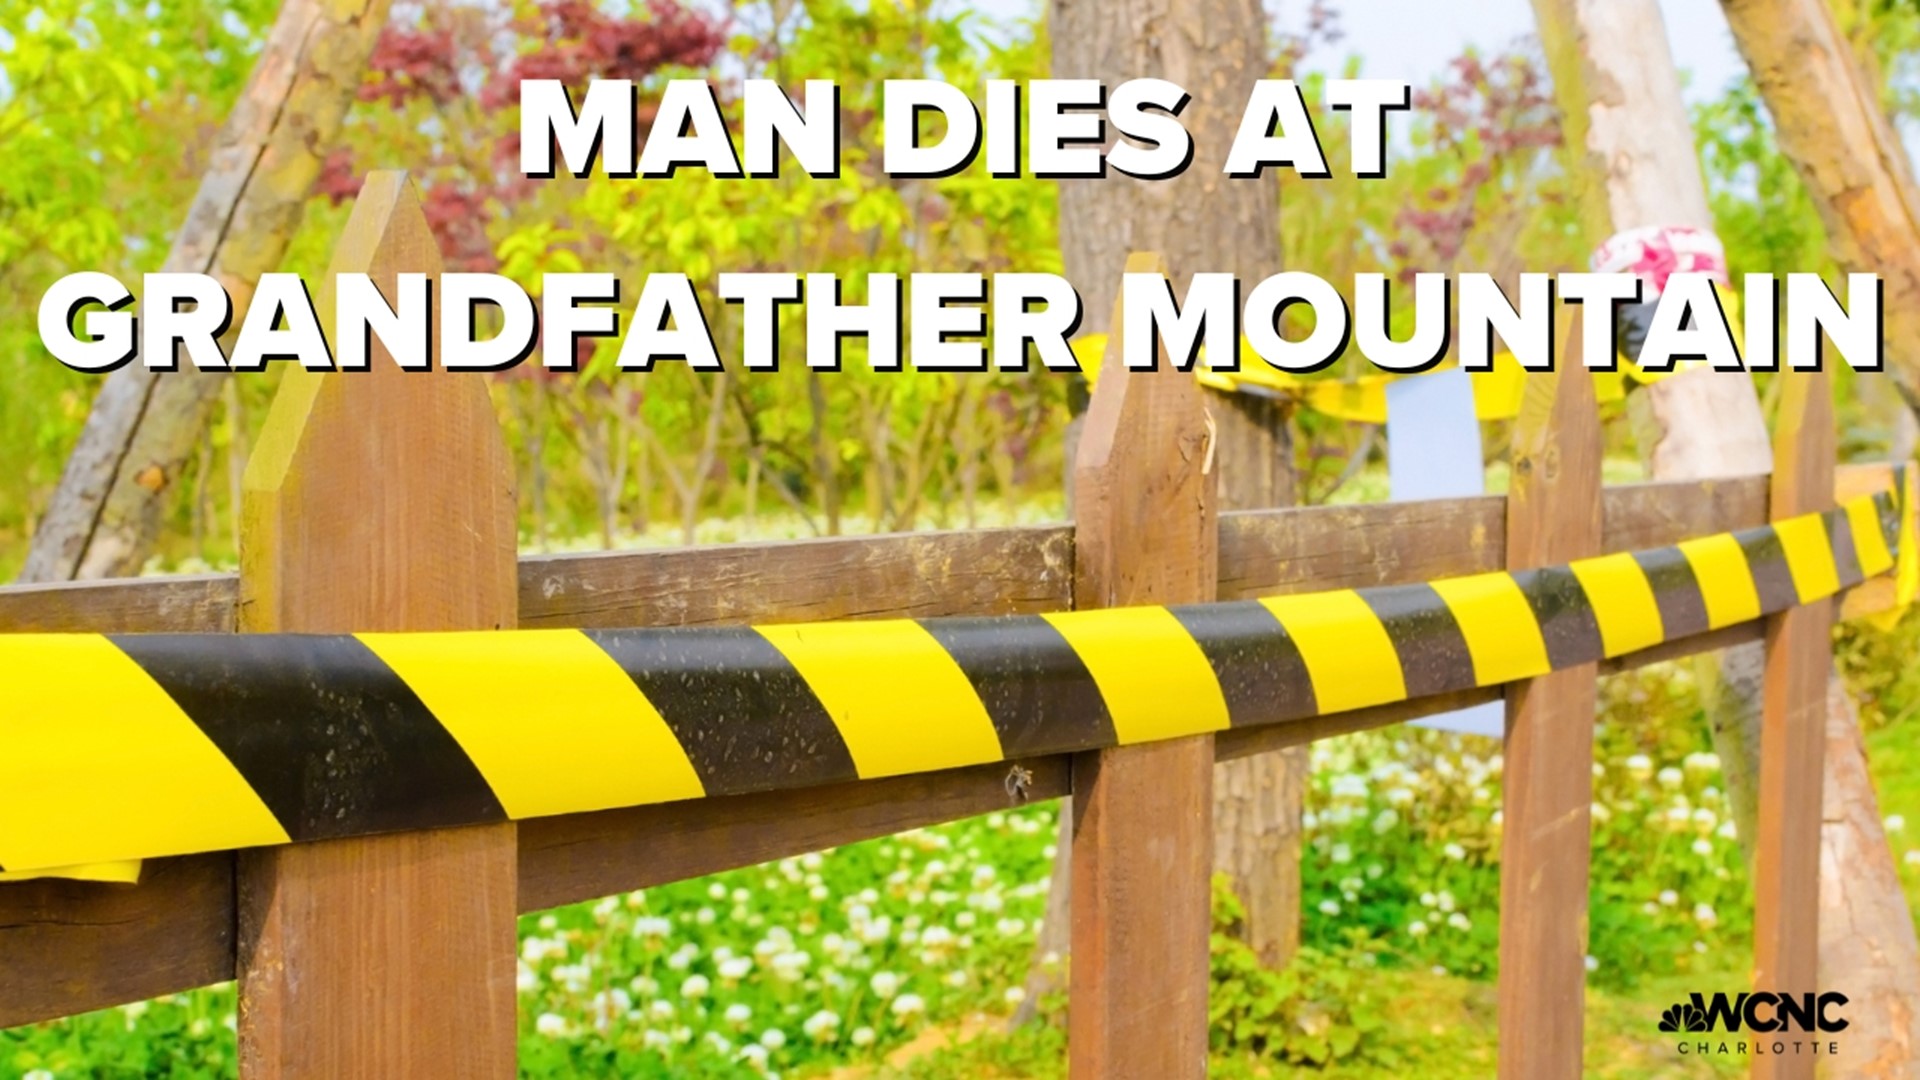 Man dies after falling at Grandfather Mountain